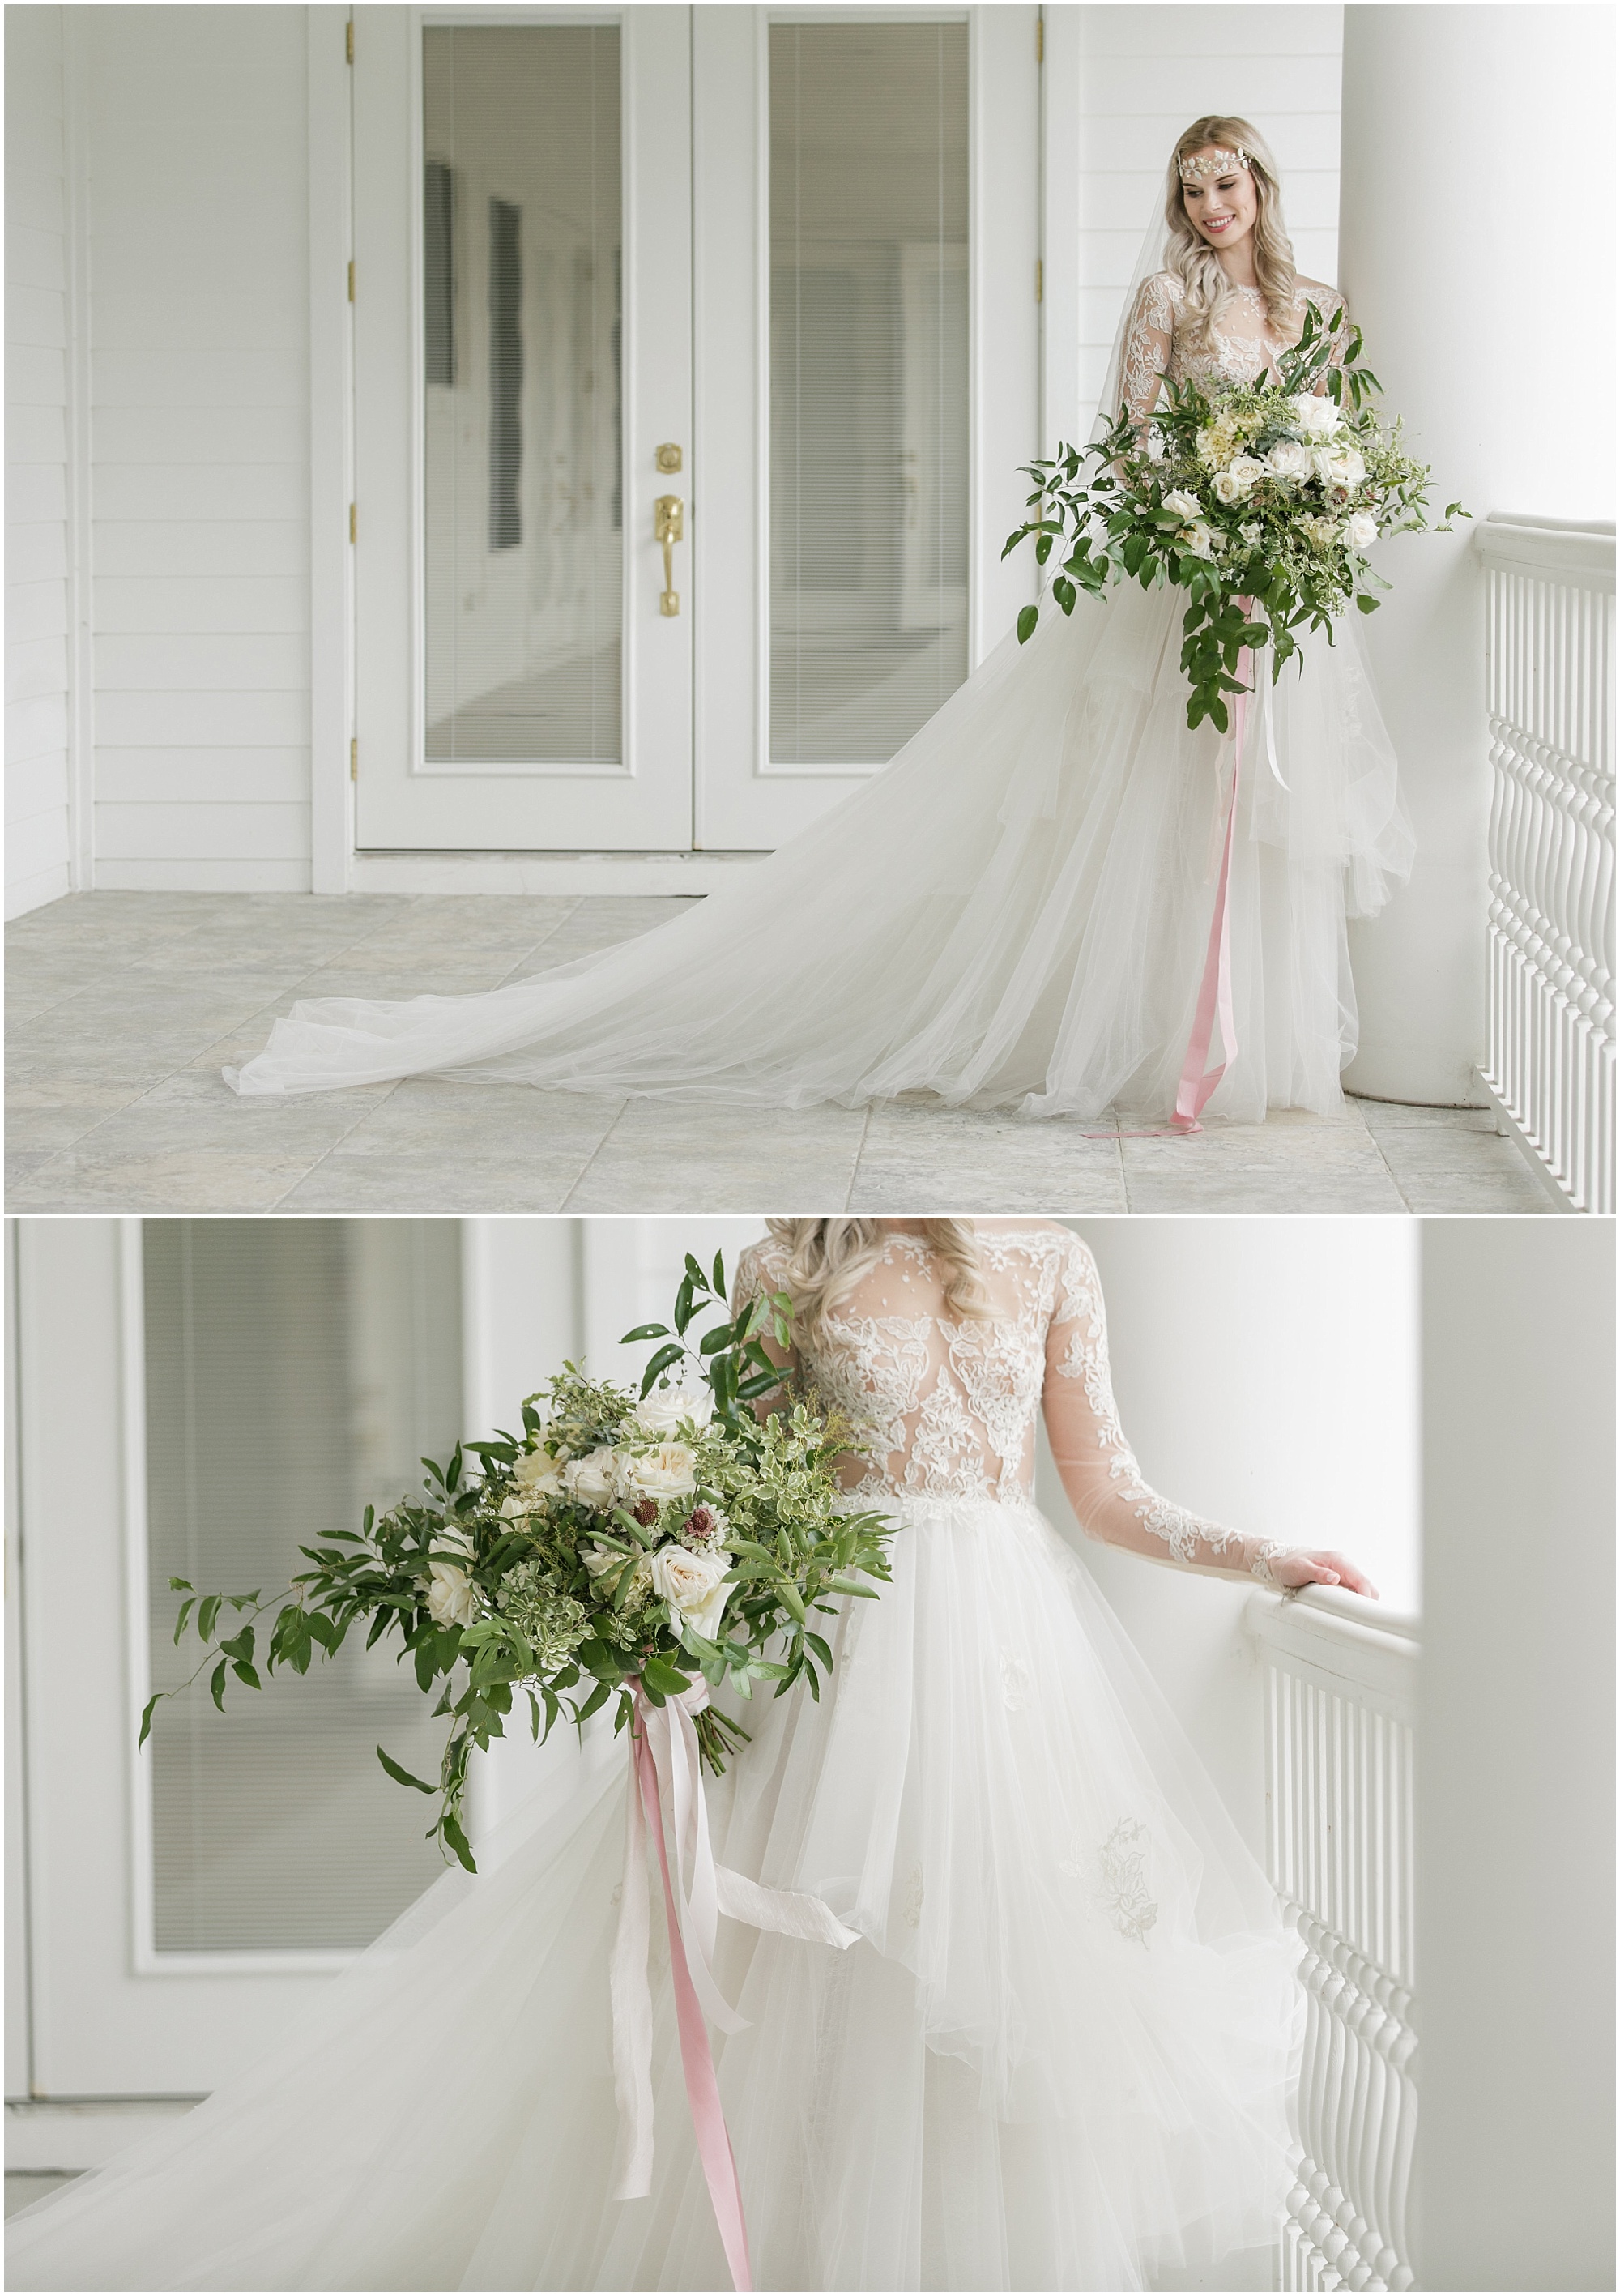 Bride on the balcony while holding her large bouquet of light colored flowers and greenery.